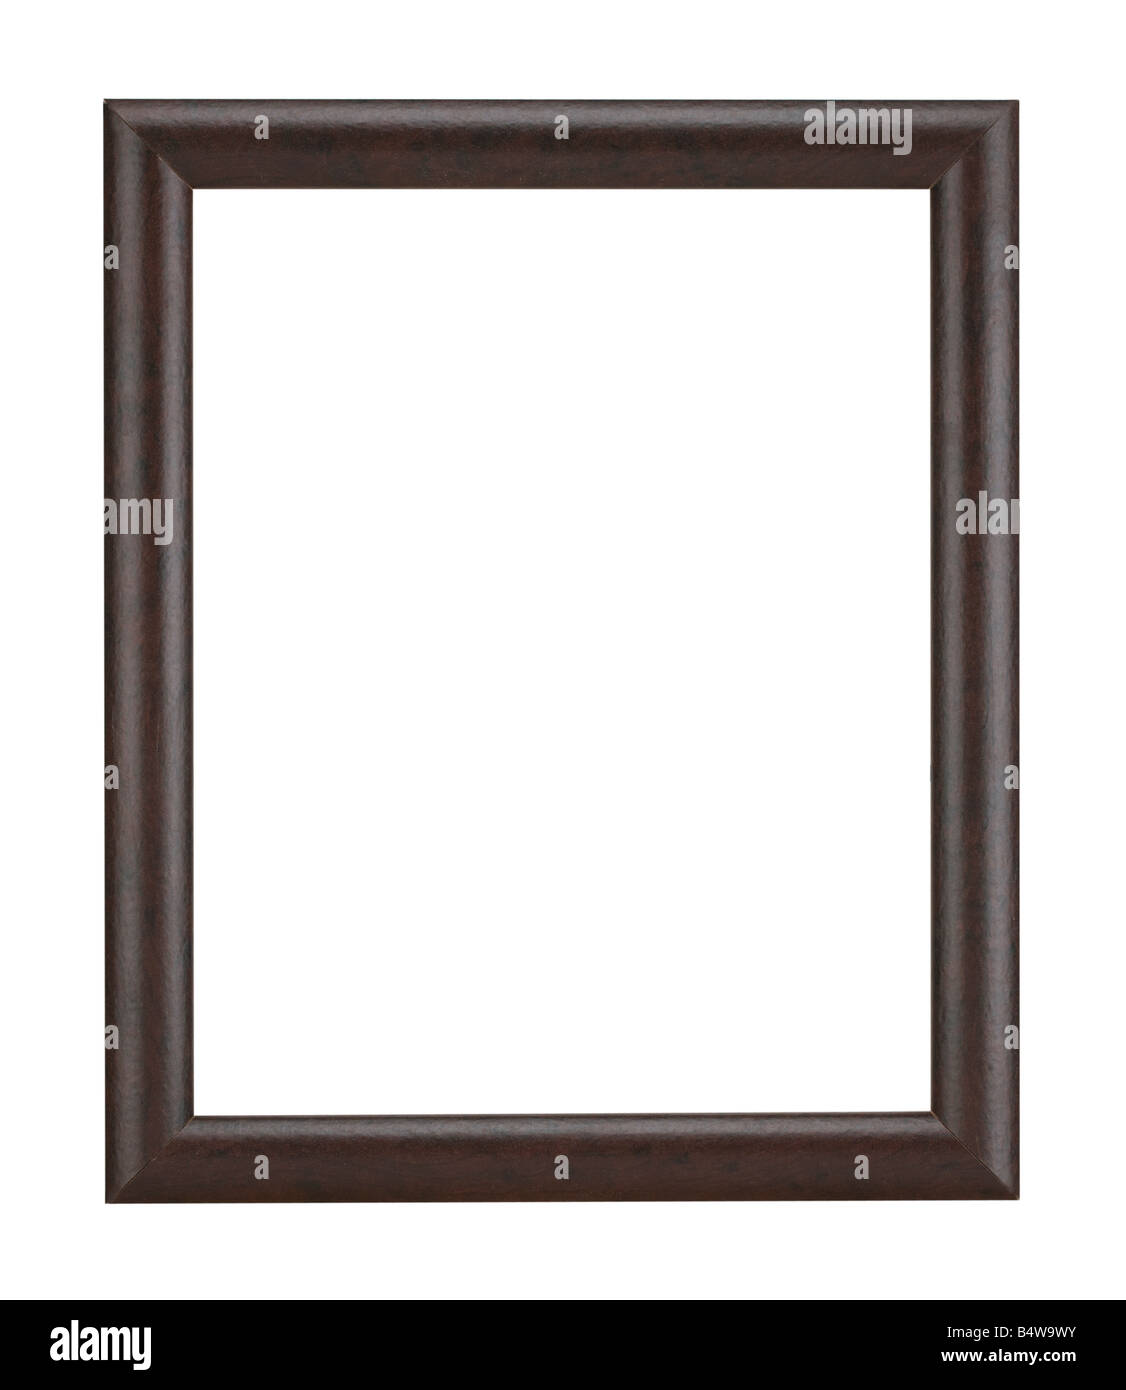 BLACK WOOD PICTURE FRAME Stock Photo